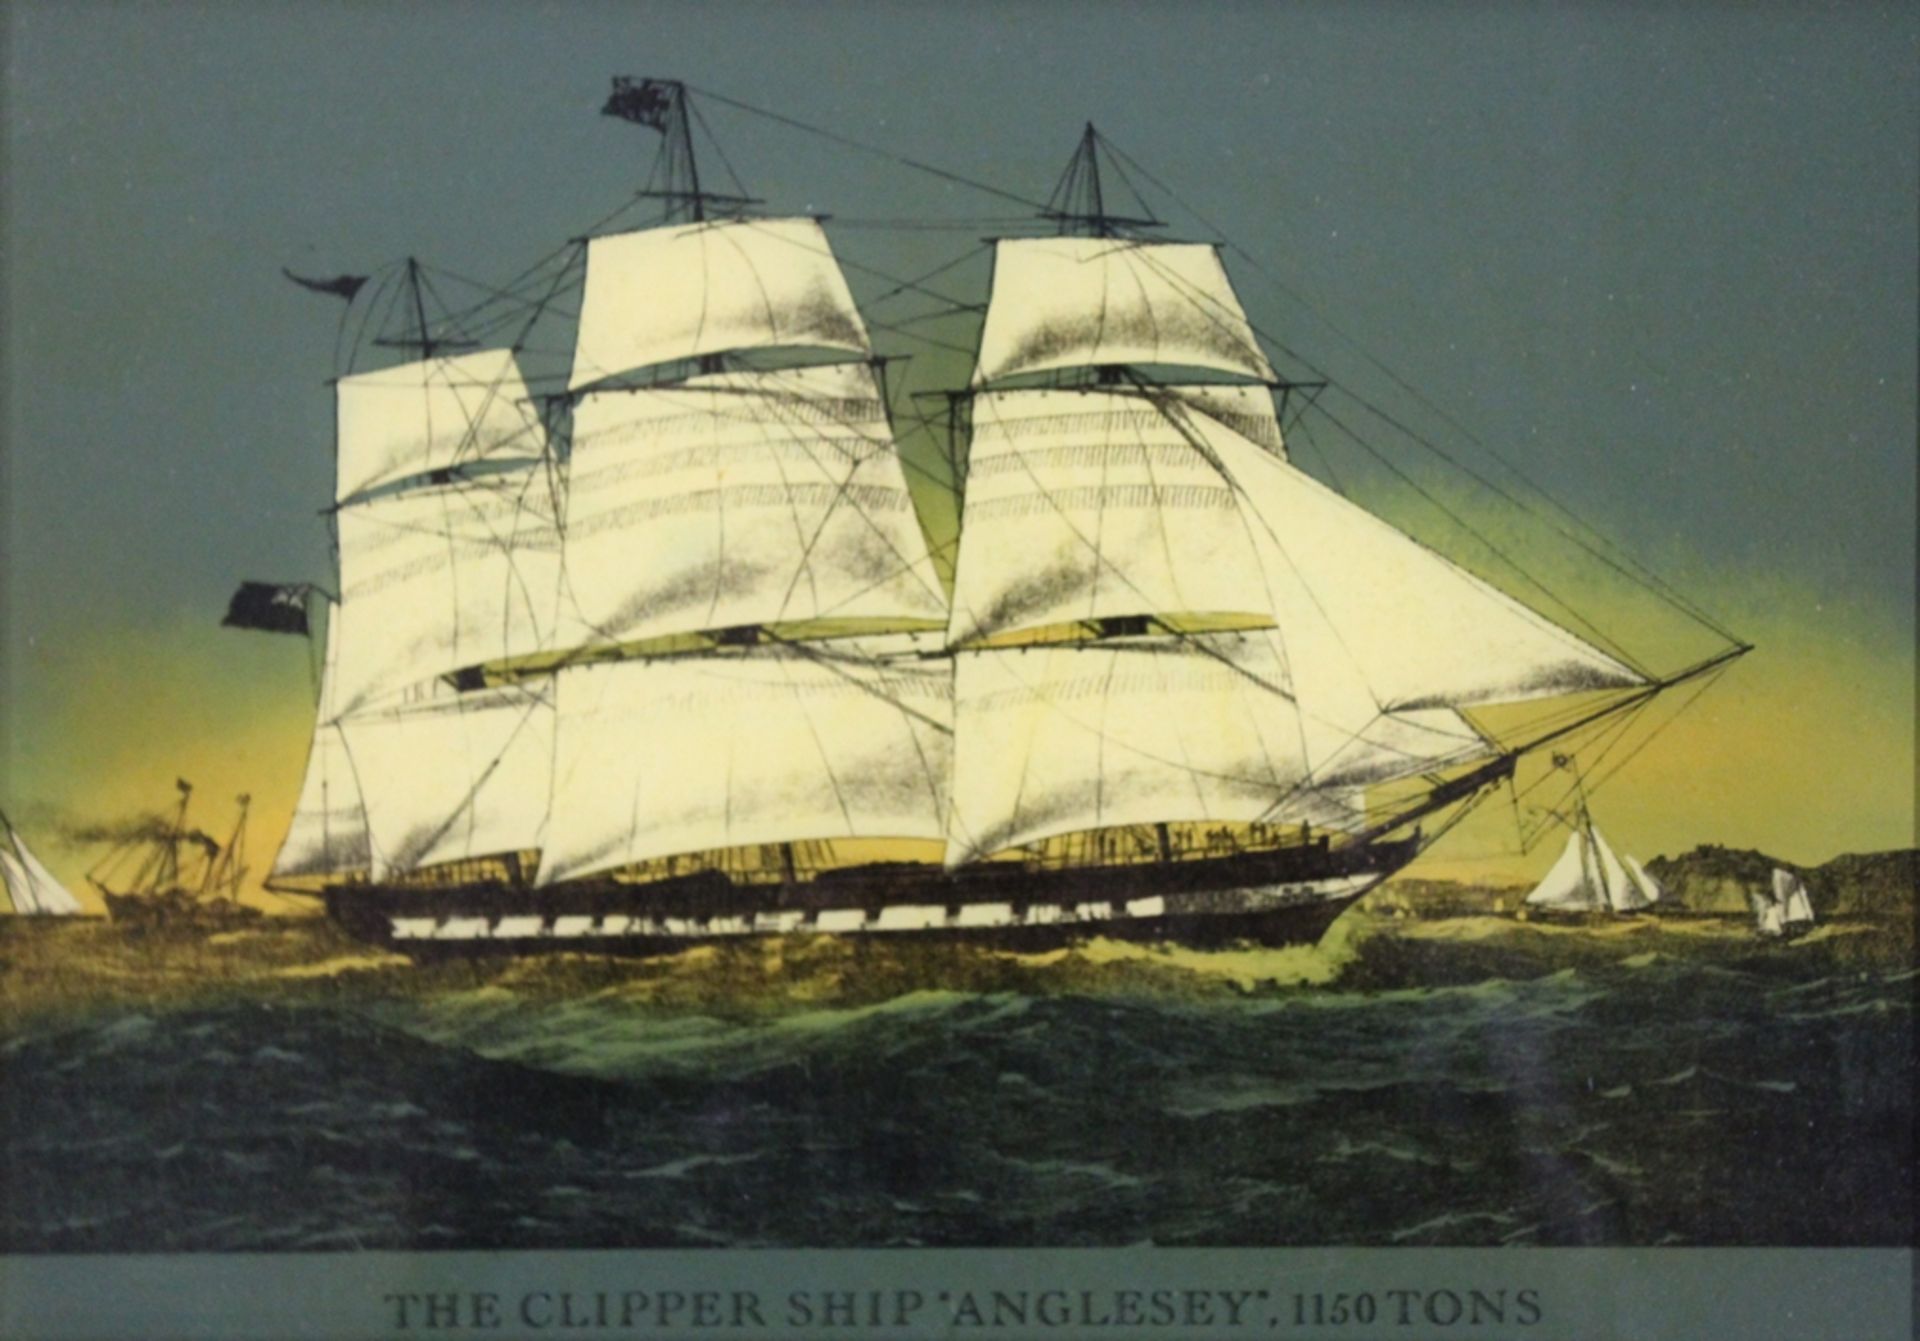 Hinterglasmalerei, The Clipper Ship "Anglesey", verso Etikette "Genuine Glass Painting, Imperial Cr